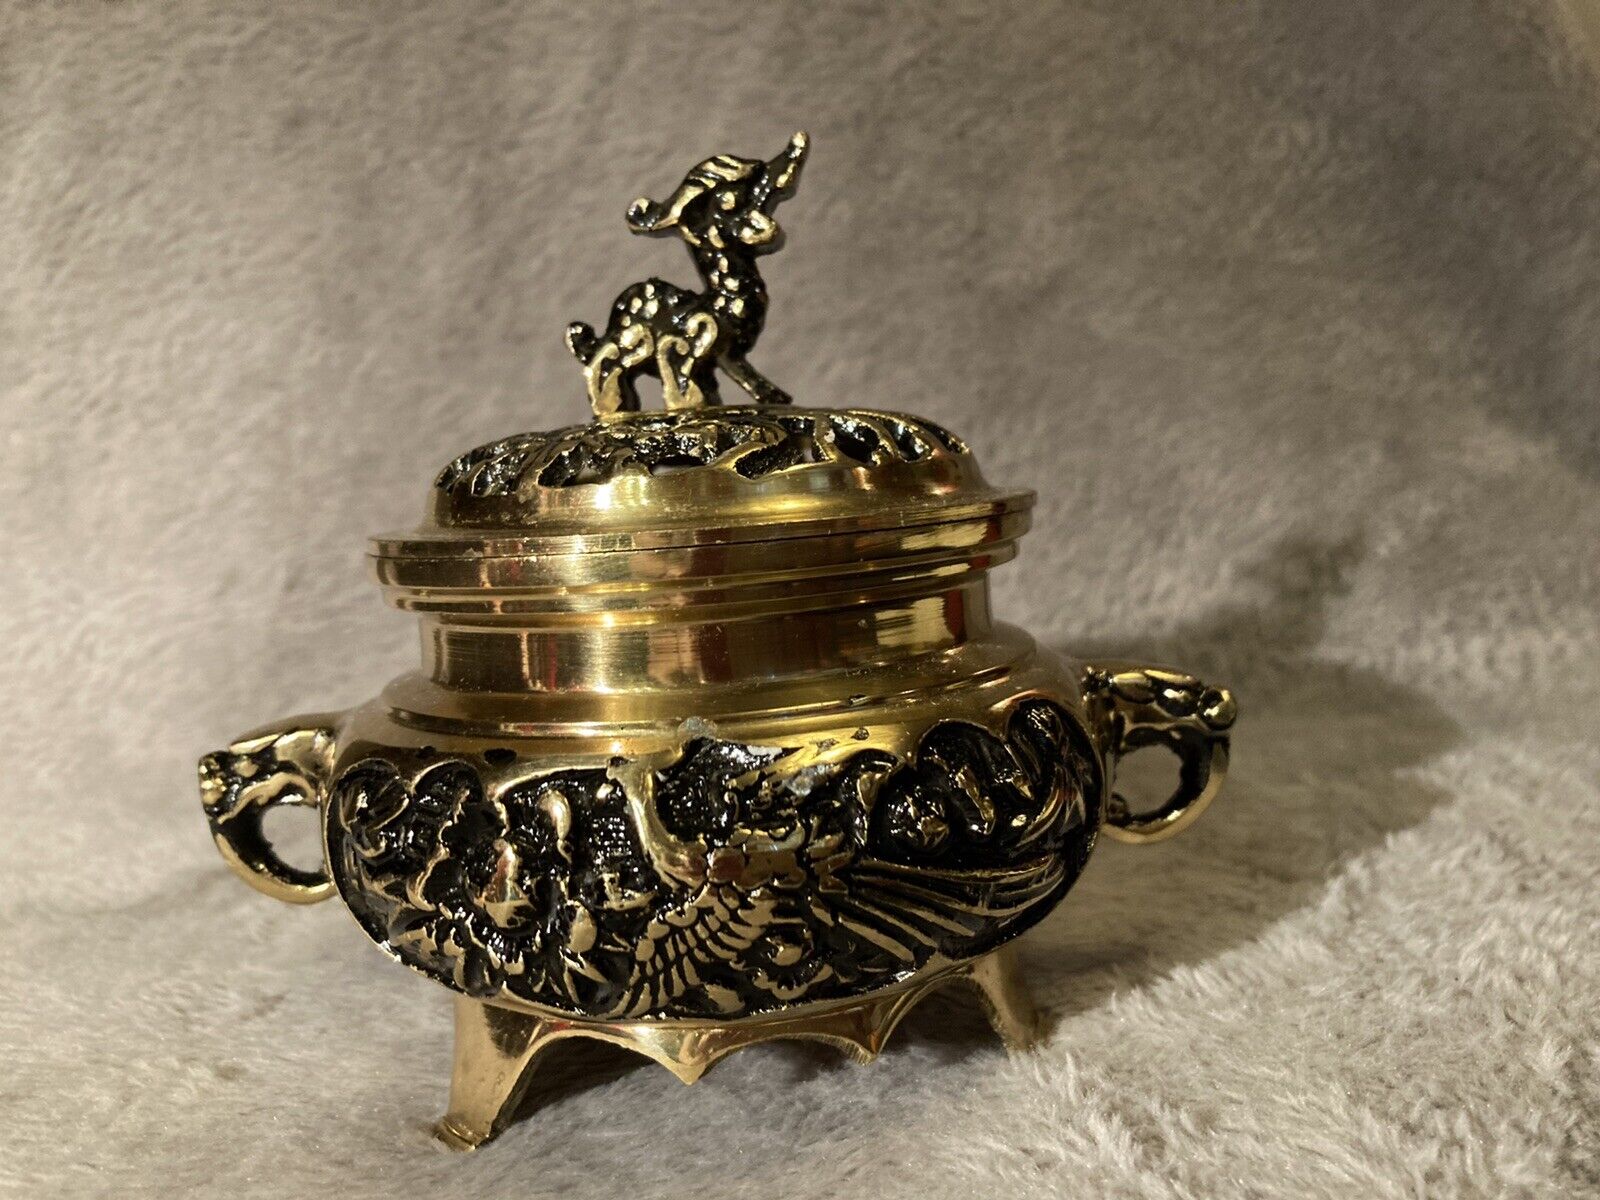 New Brass Asian Censer 5x4x4 with Elephants, Birds, and Fruits